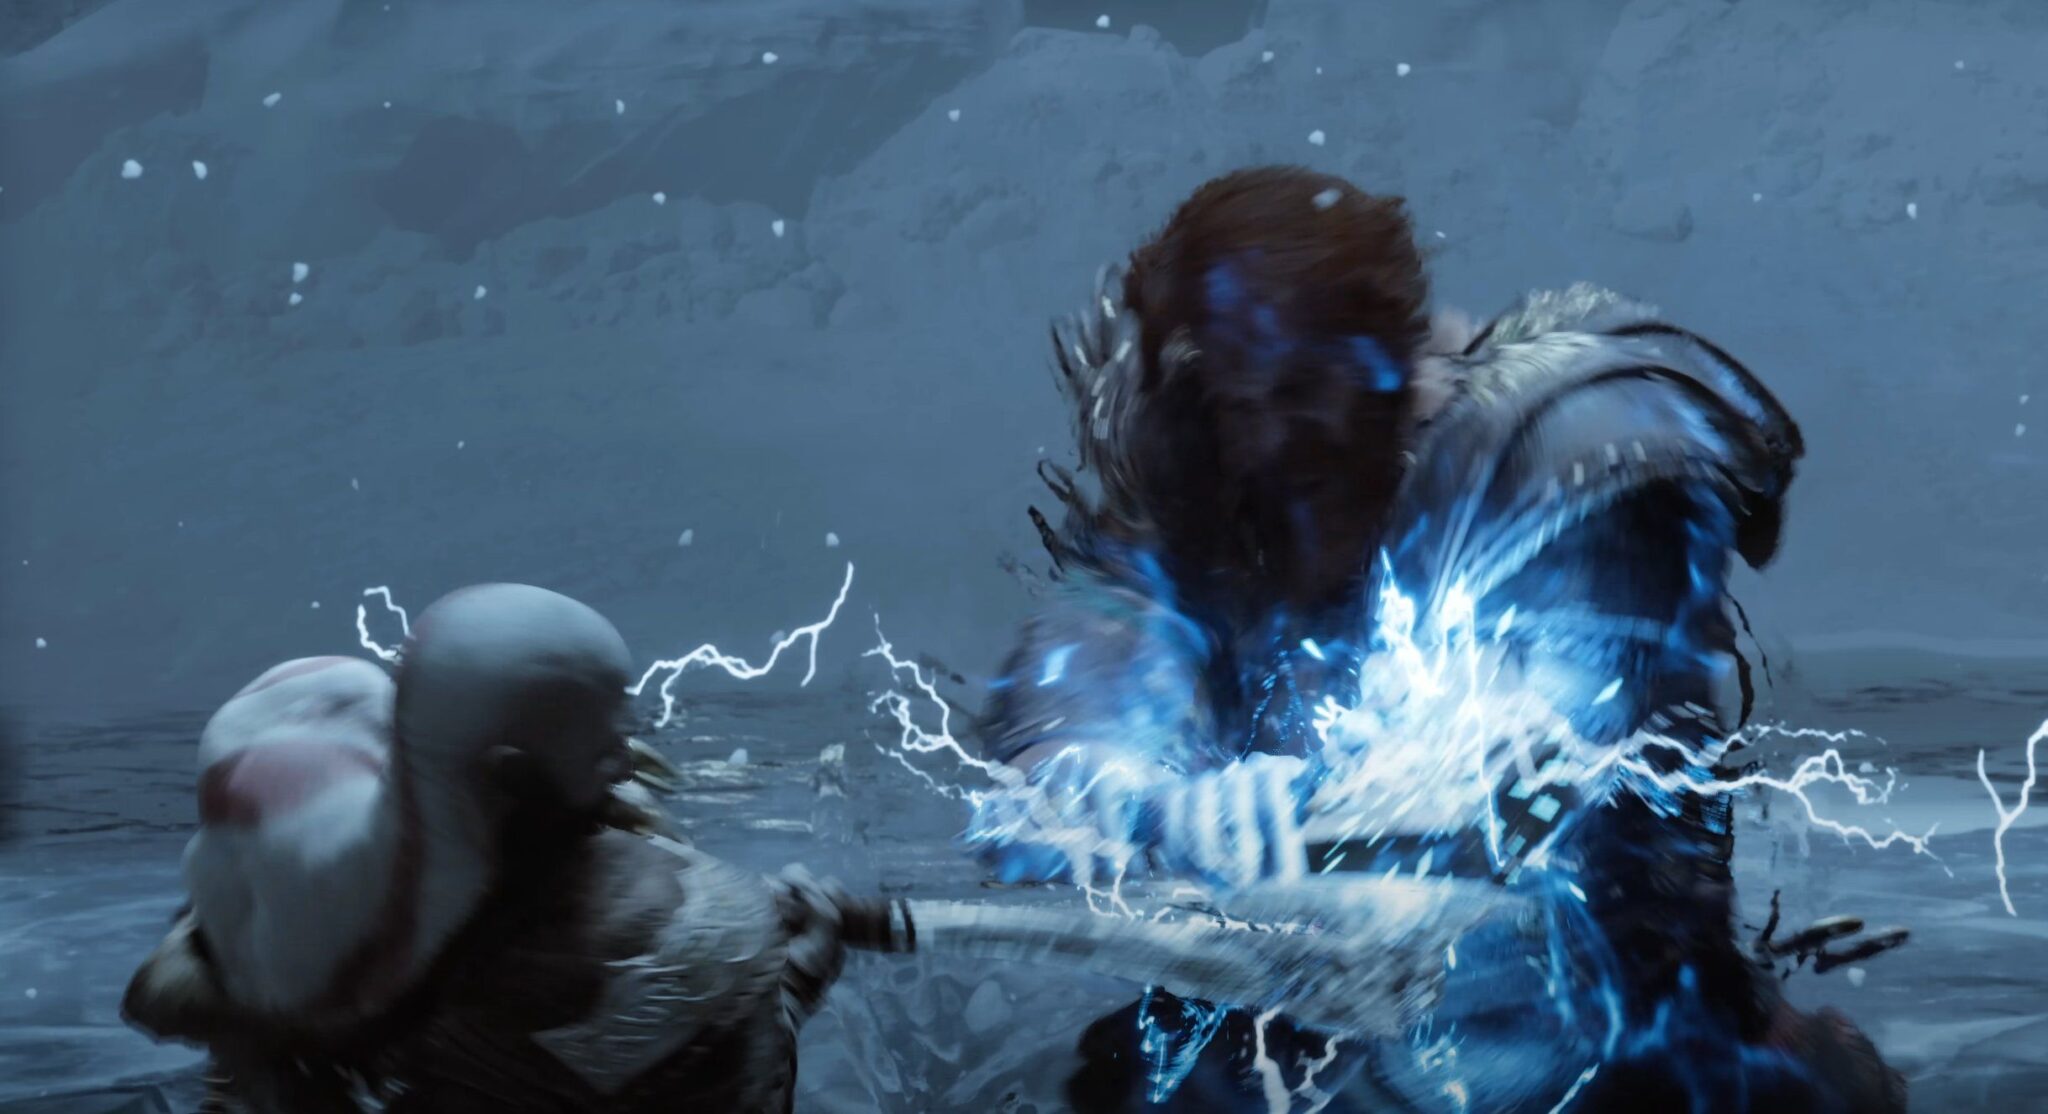 God of War Ragnarok Thor vs Kratos Full 10 Minute Fight Leaked Watch Here scaled